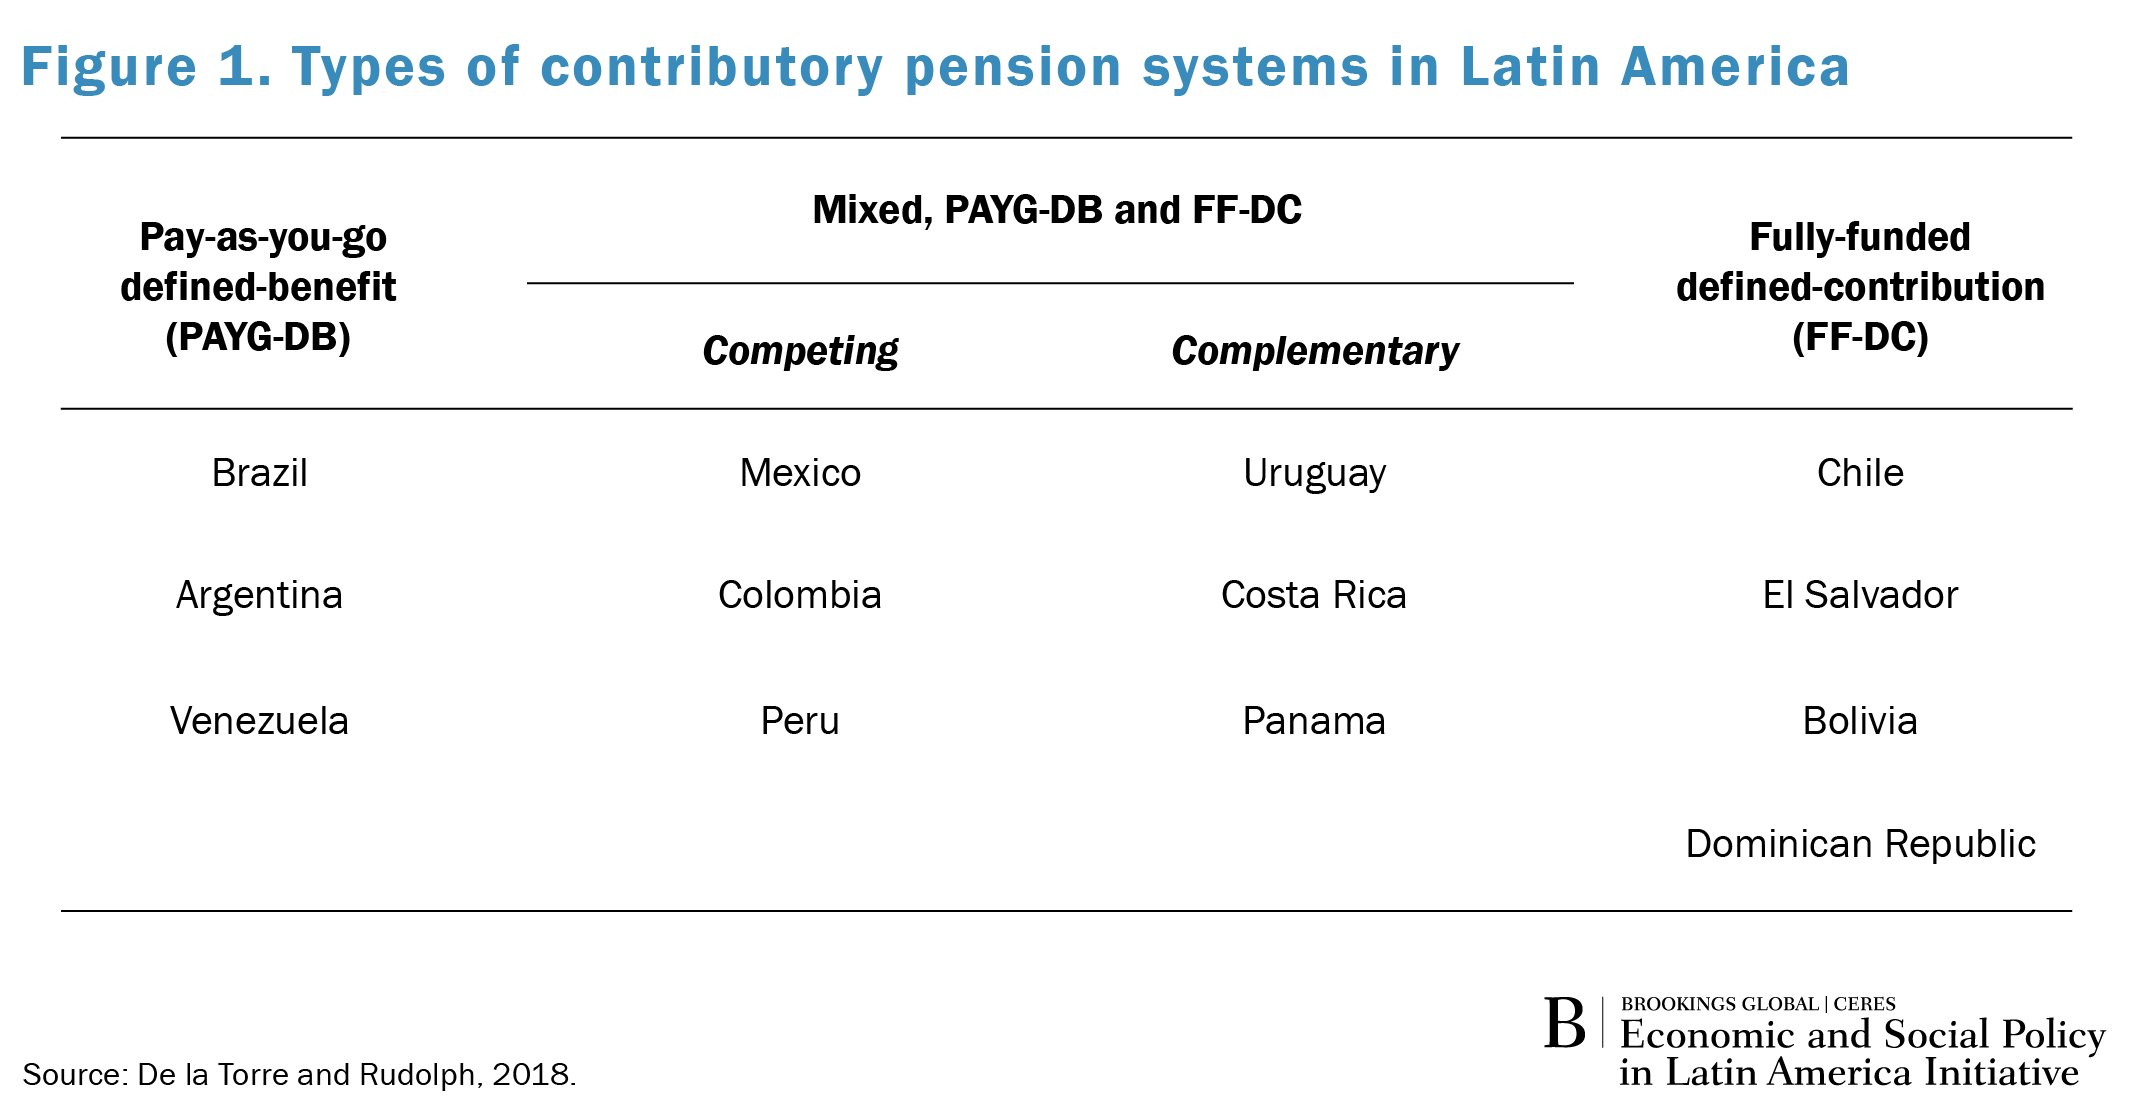 The troubled state of pension systems in Latin America